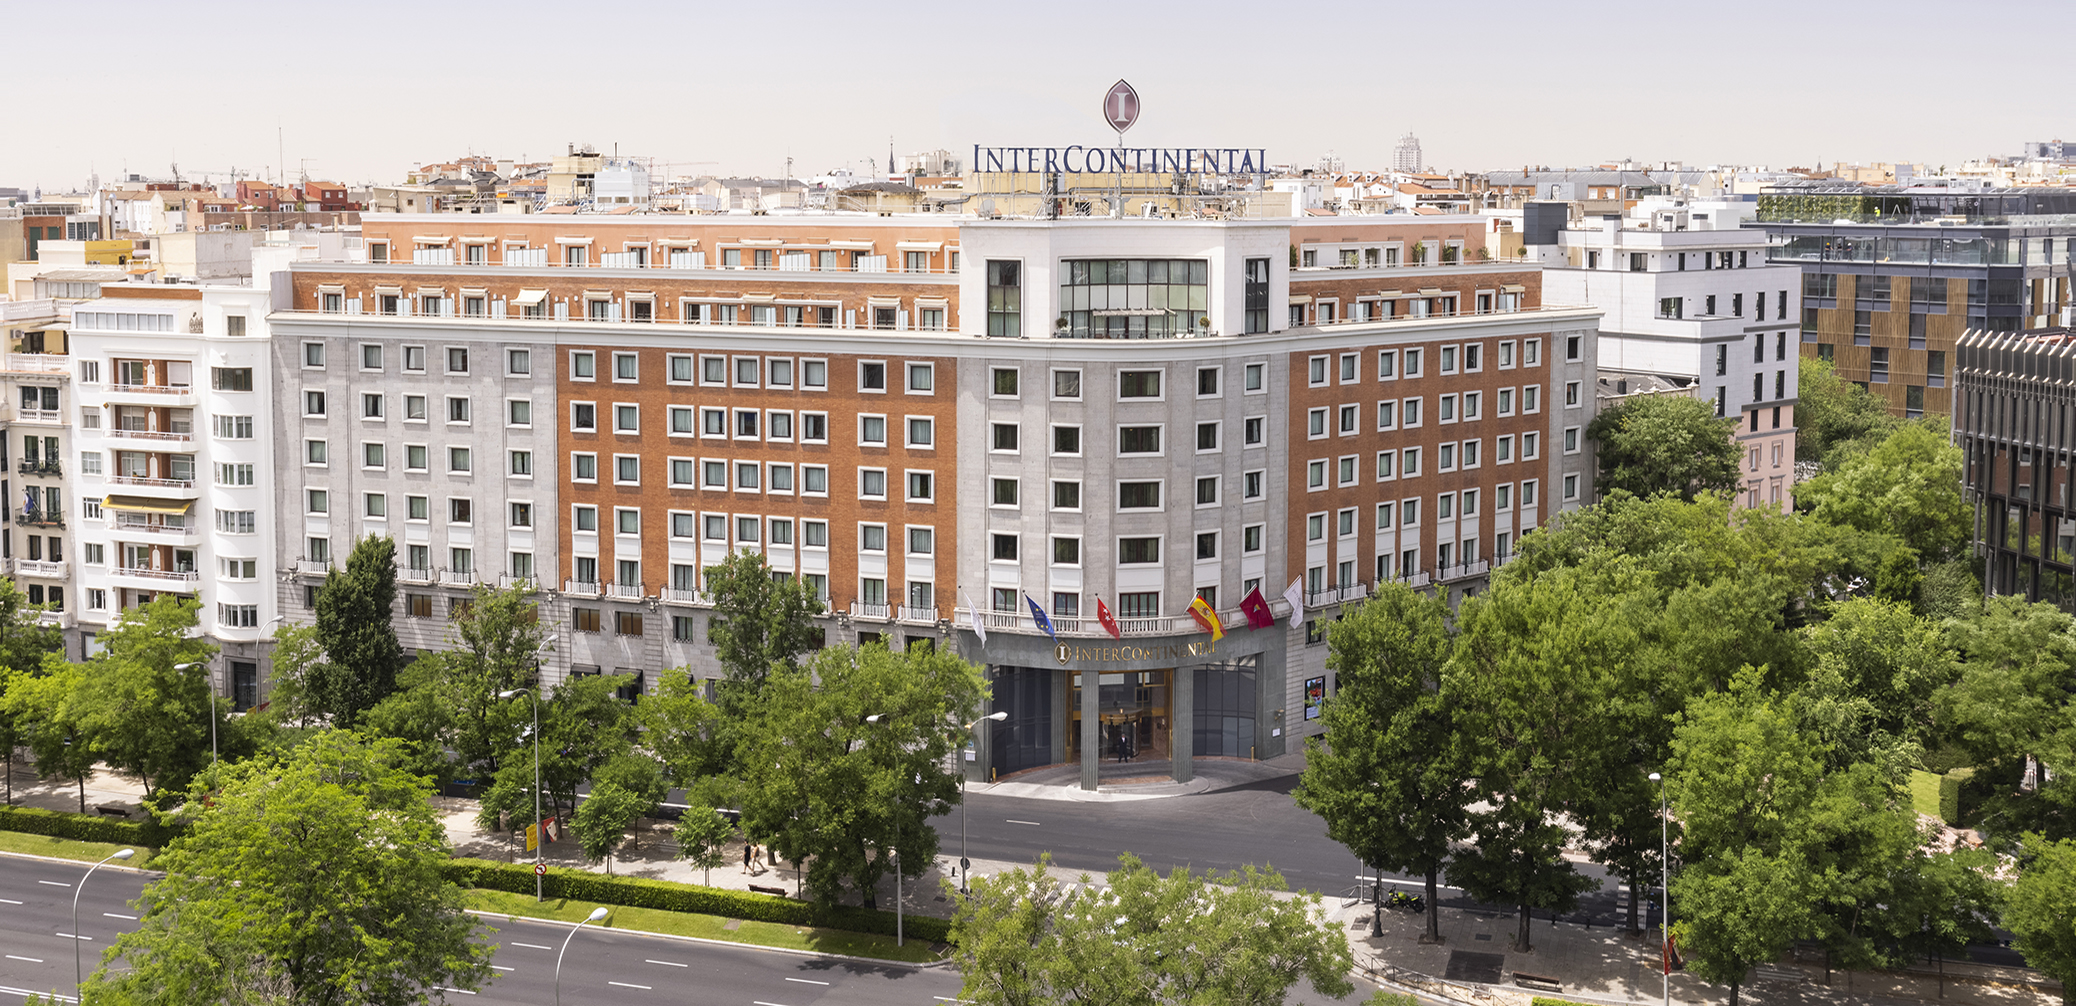 review-interContinental-madrid